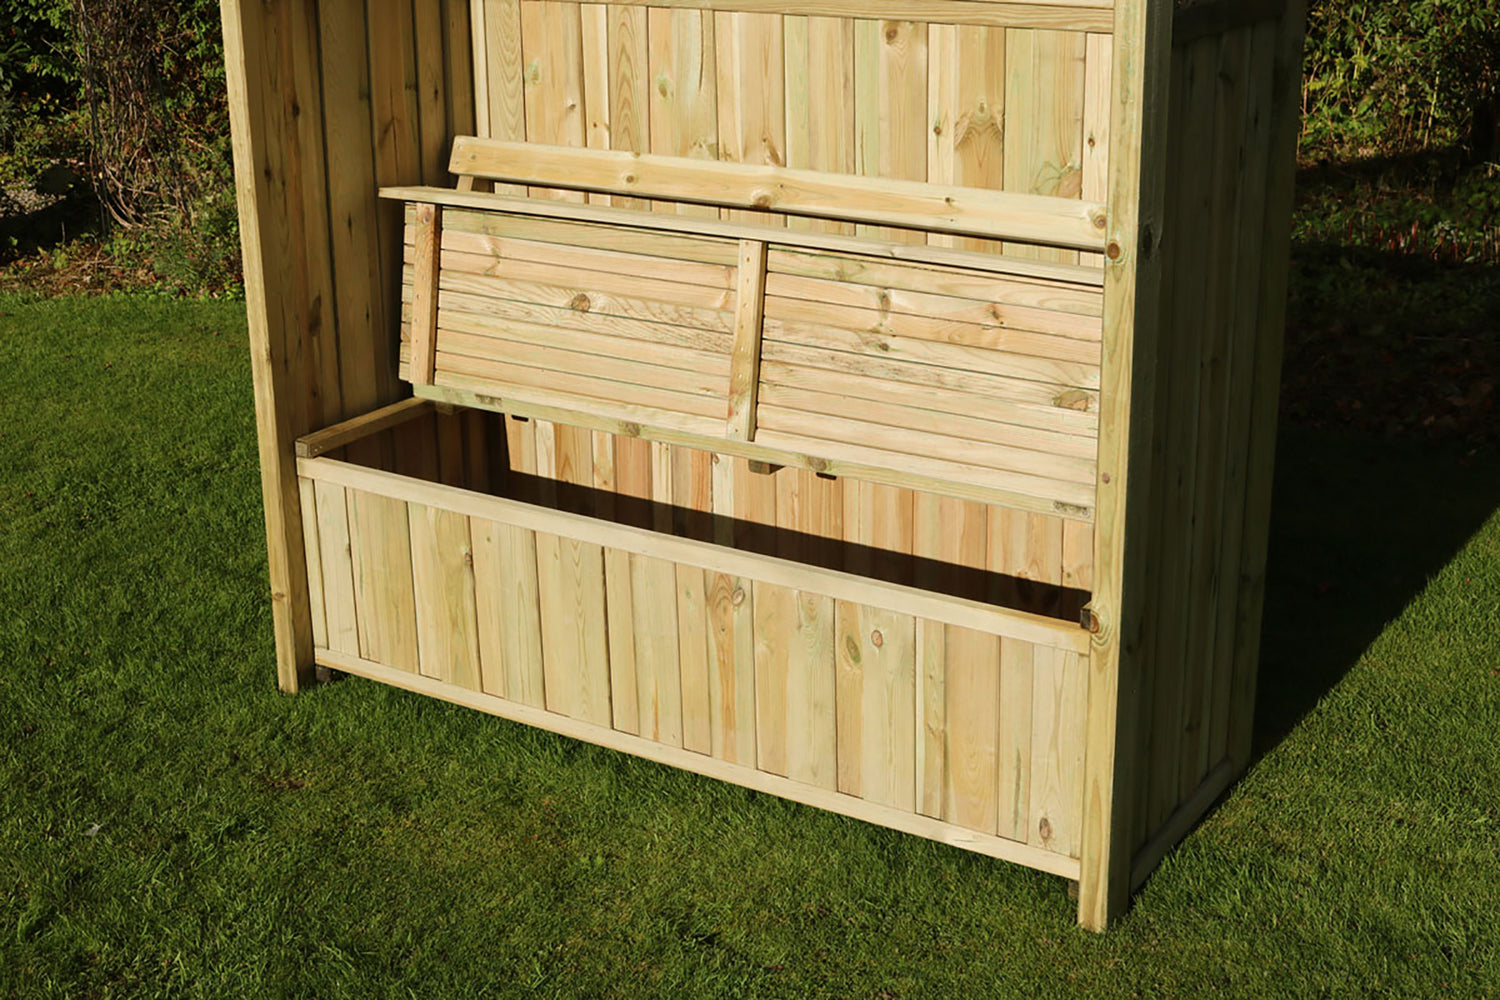 Hampshire-Arbour-with-Storage-Box-Detail-3 kirsty.jpg